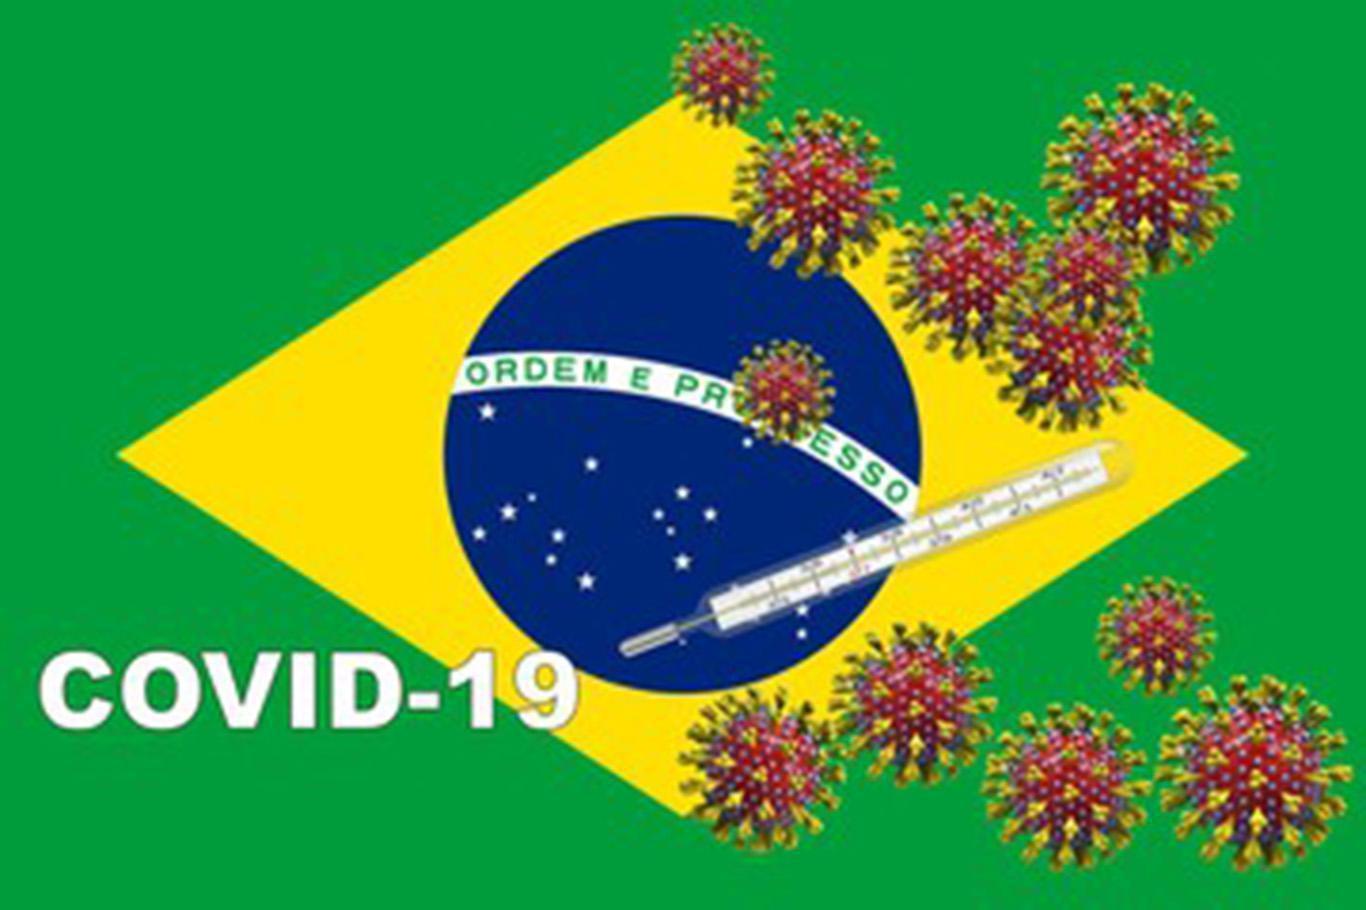 Coronavirus: Brazil reports 727 new deaths, 25,234 cases in the last 24 hours